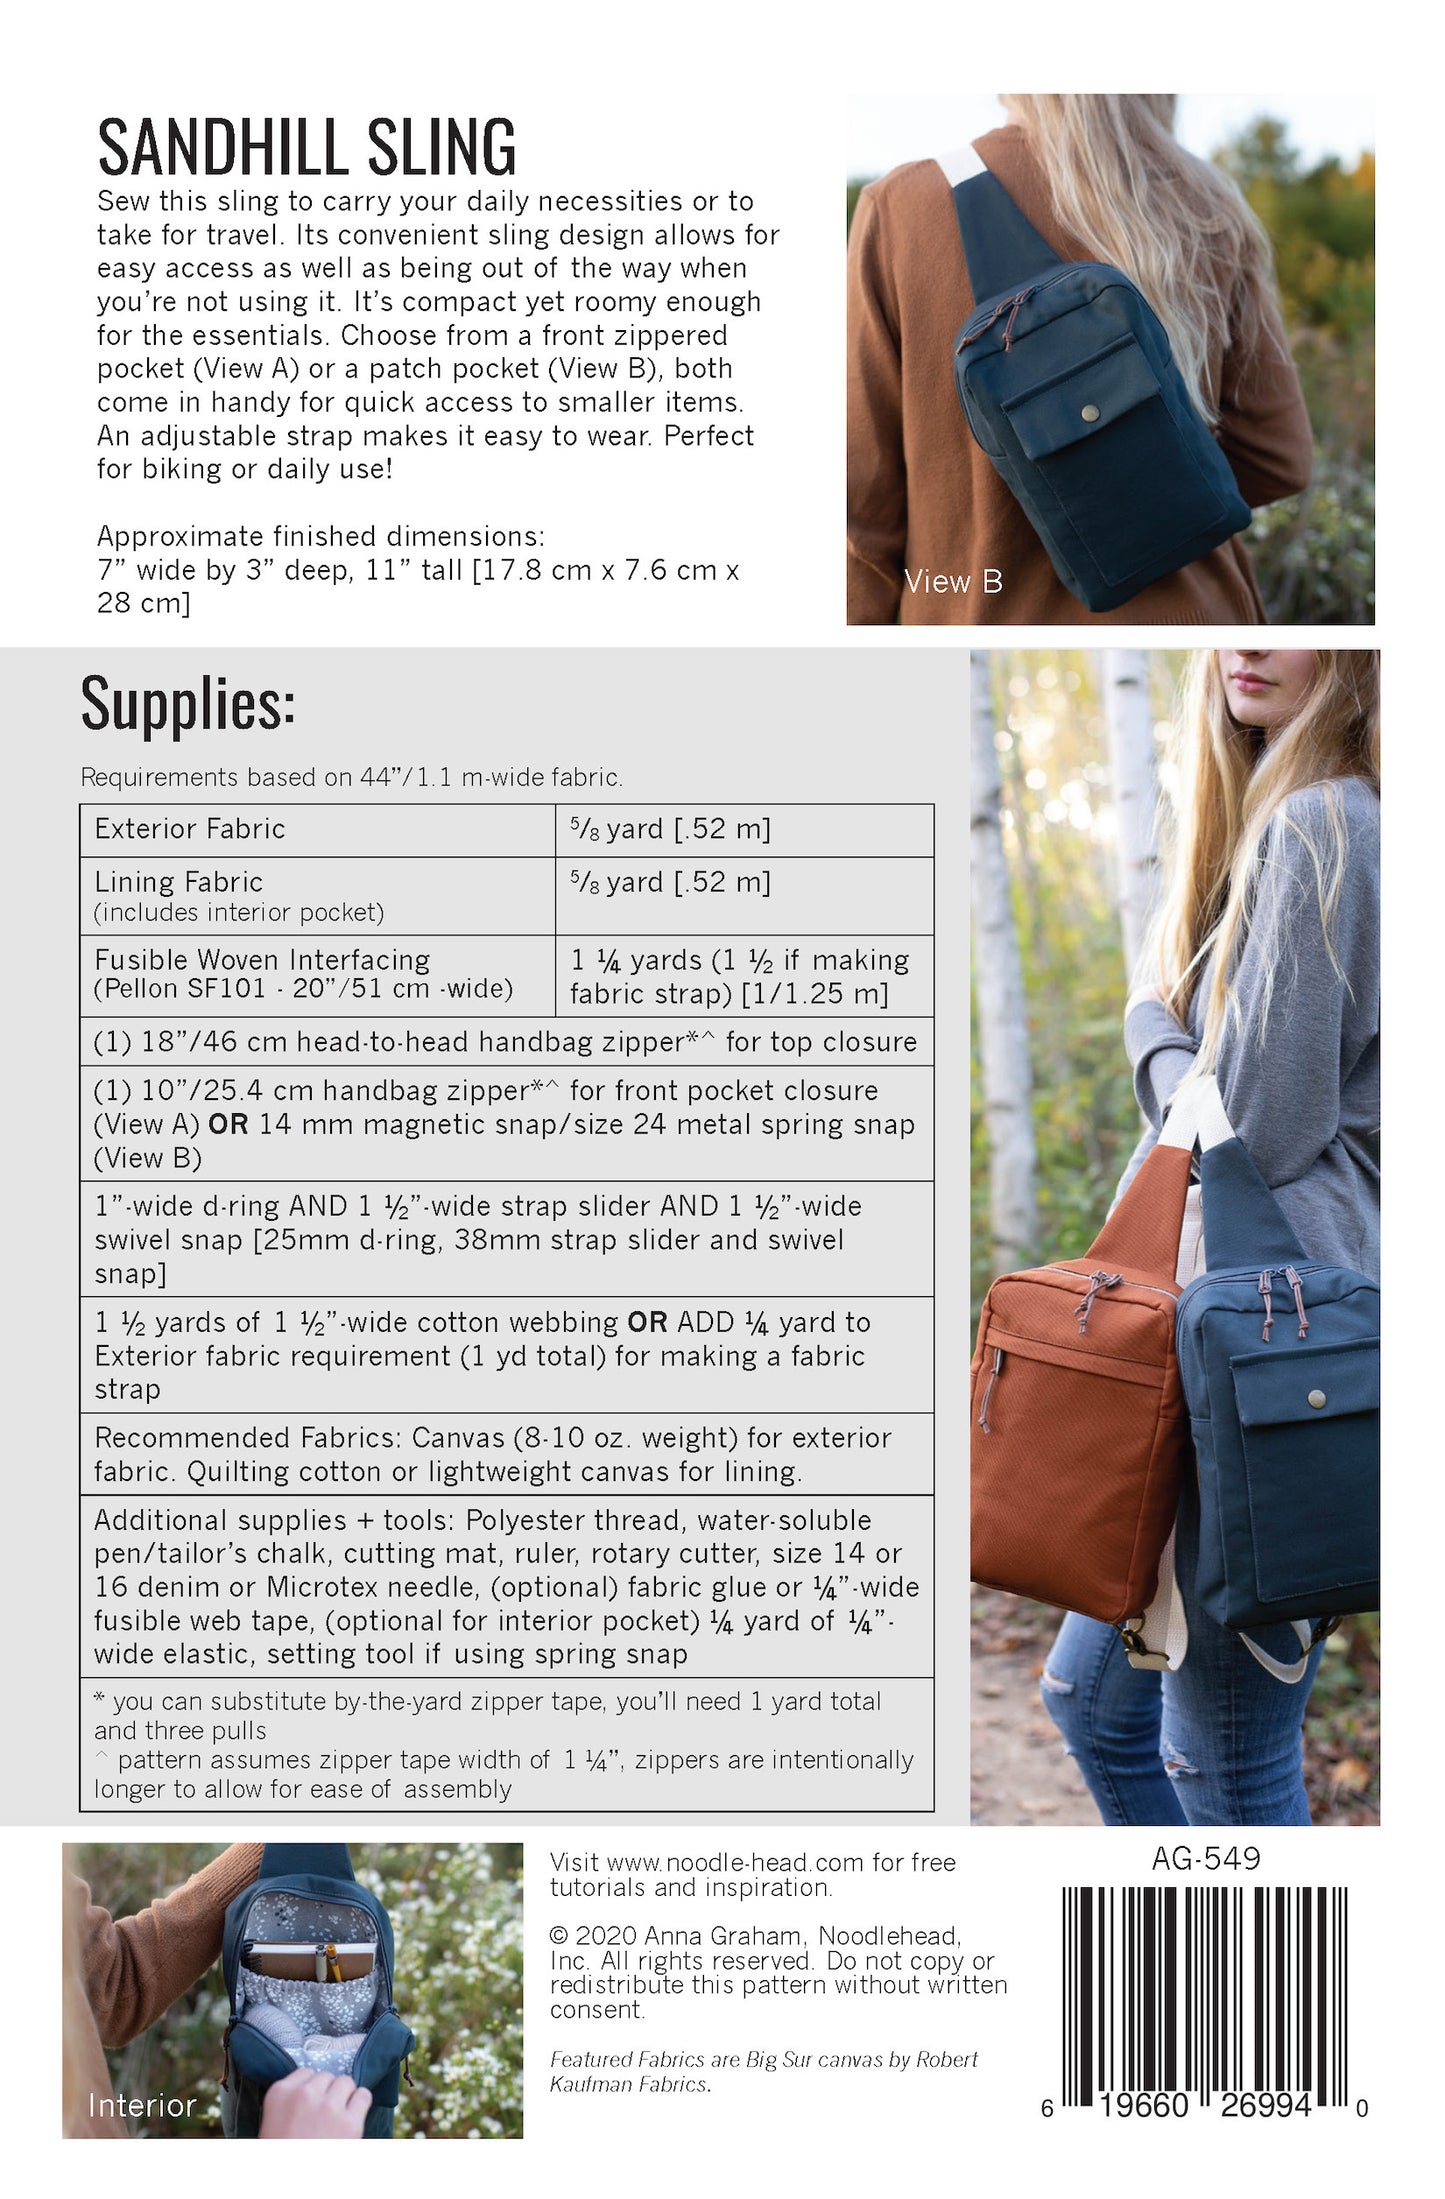 Sandhill Sling Sewing Pattern - Sewfinity